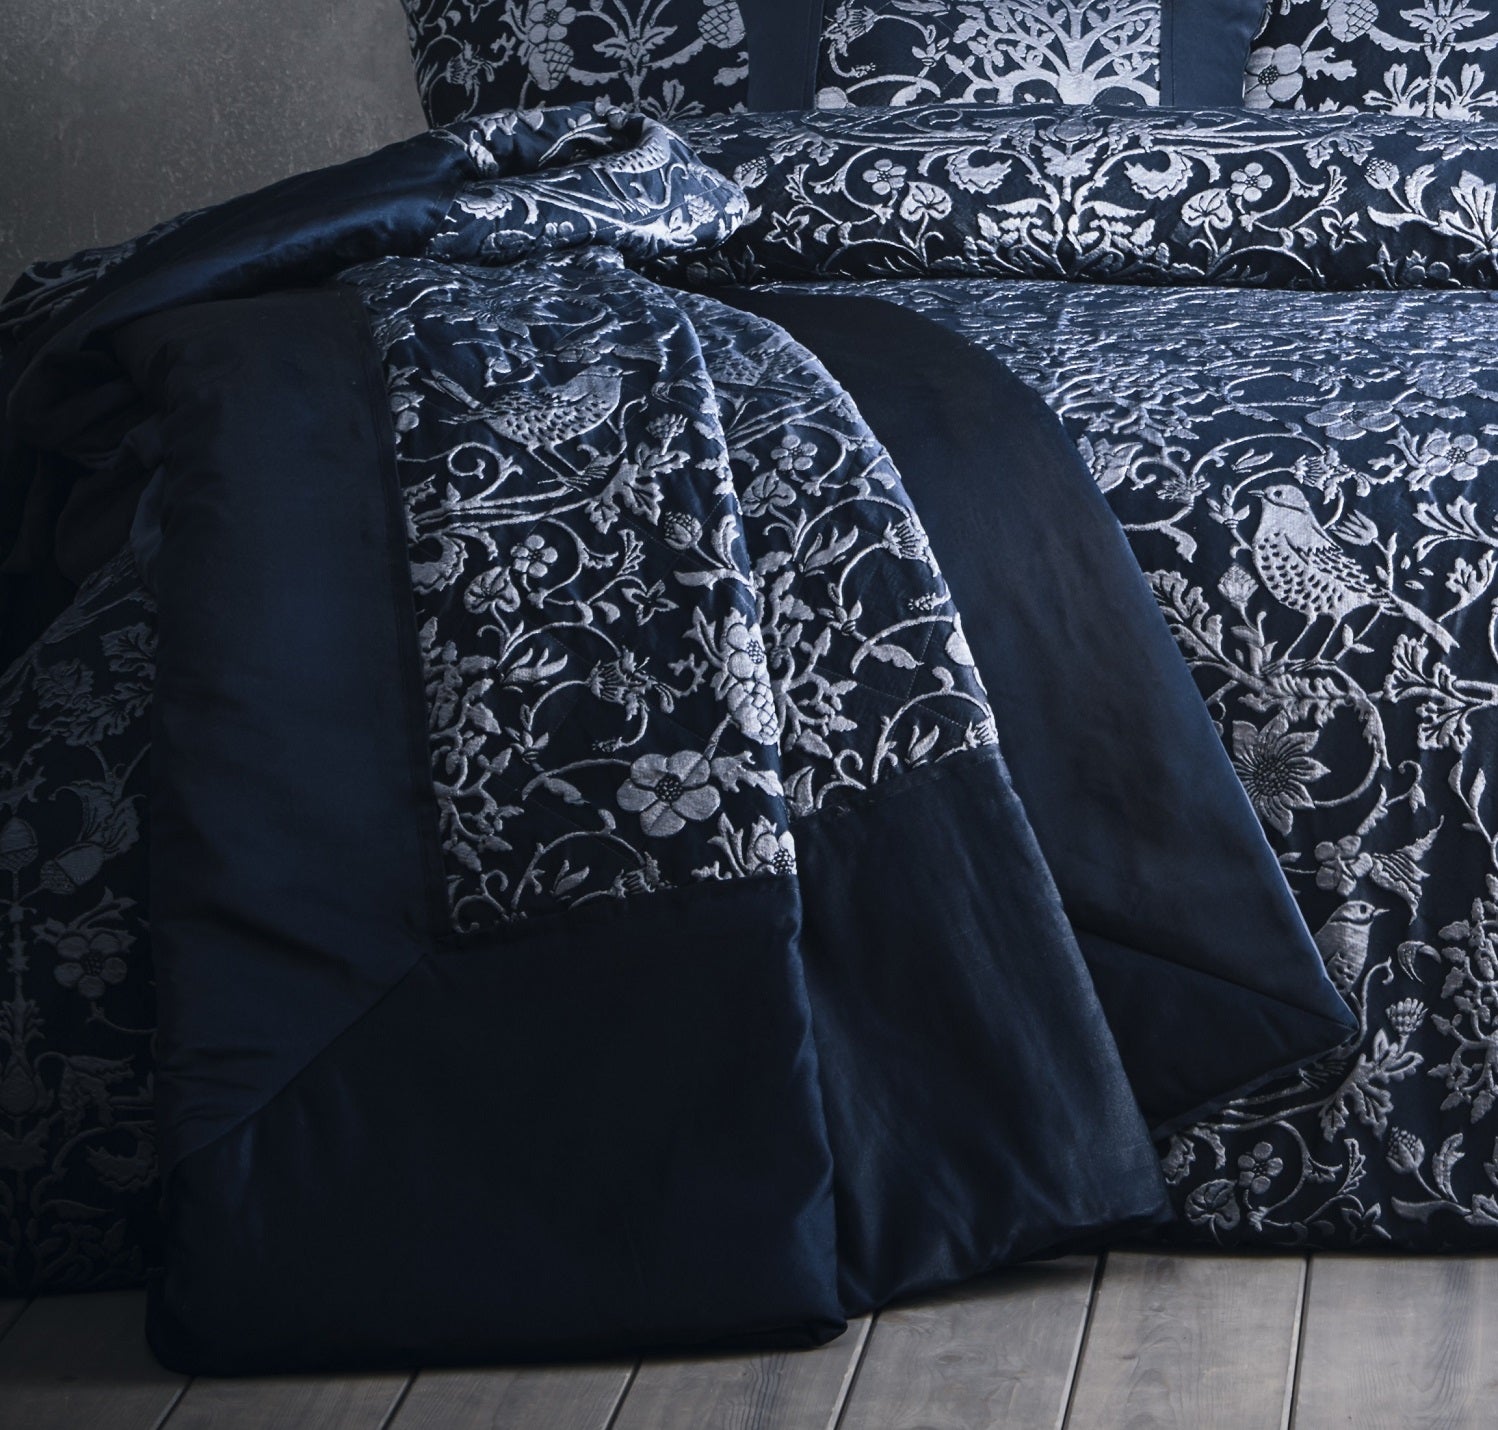 Luxury Jacquard Oak Quilted Bedspread + Pillowshams - Navy Blue